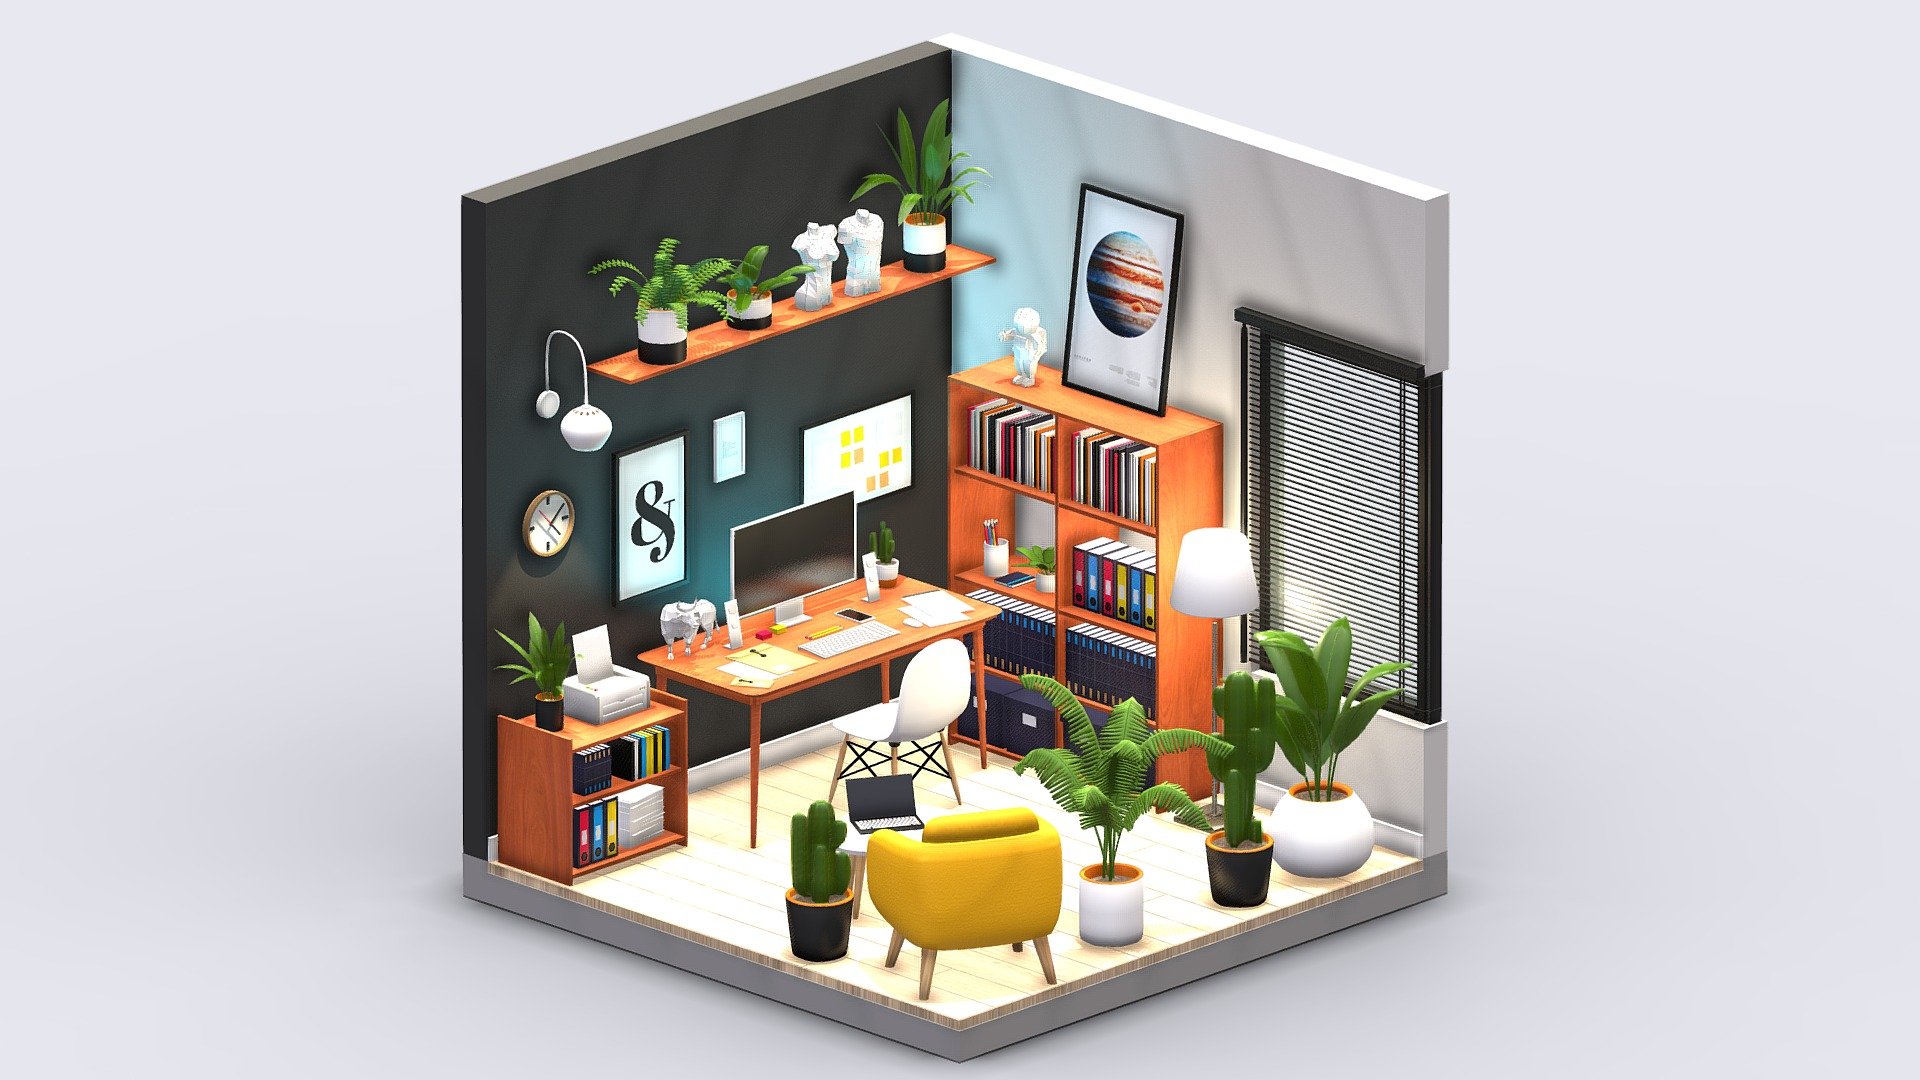 We are working on a new series of isometric tiny spaces, where we aill start showcasing the creation process, all screen captures will be available on our Youtube channel so check these out:


Isometric Office - Speed Modeling in Blender 3.3 
Isometric Office - Speed Animation in Blender 3.3
 - Tiny Office - 3D model by Studio Ochi (@studioochi) 3d model